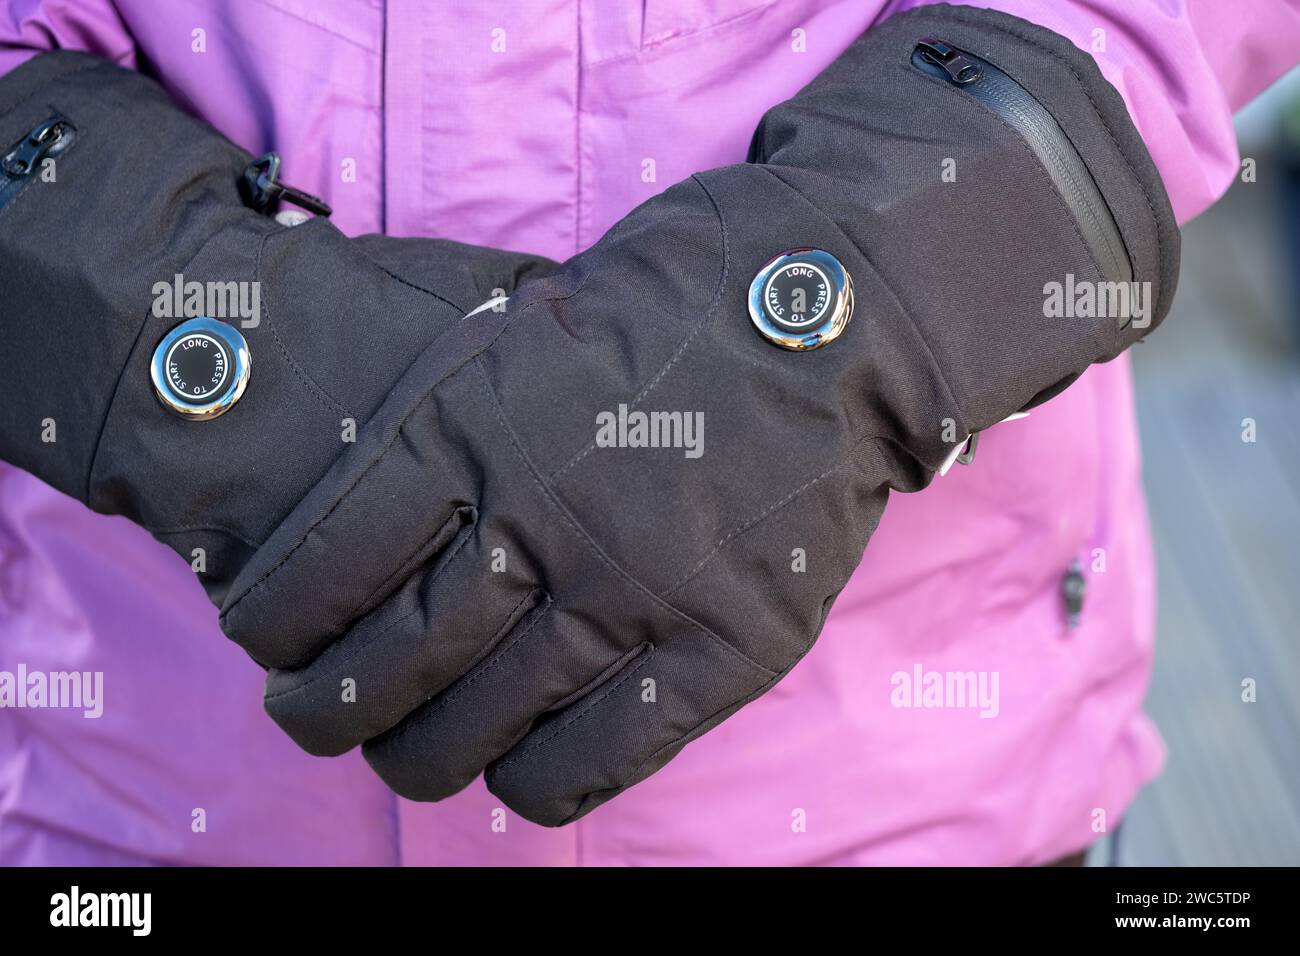 A woman wearing battery heated gloves during cold weather. The gloves have variable heat settings and help those suffering with Reynauds Disease Stock Photo